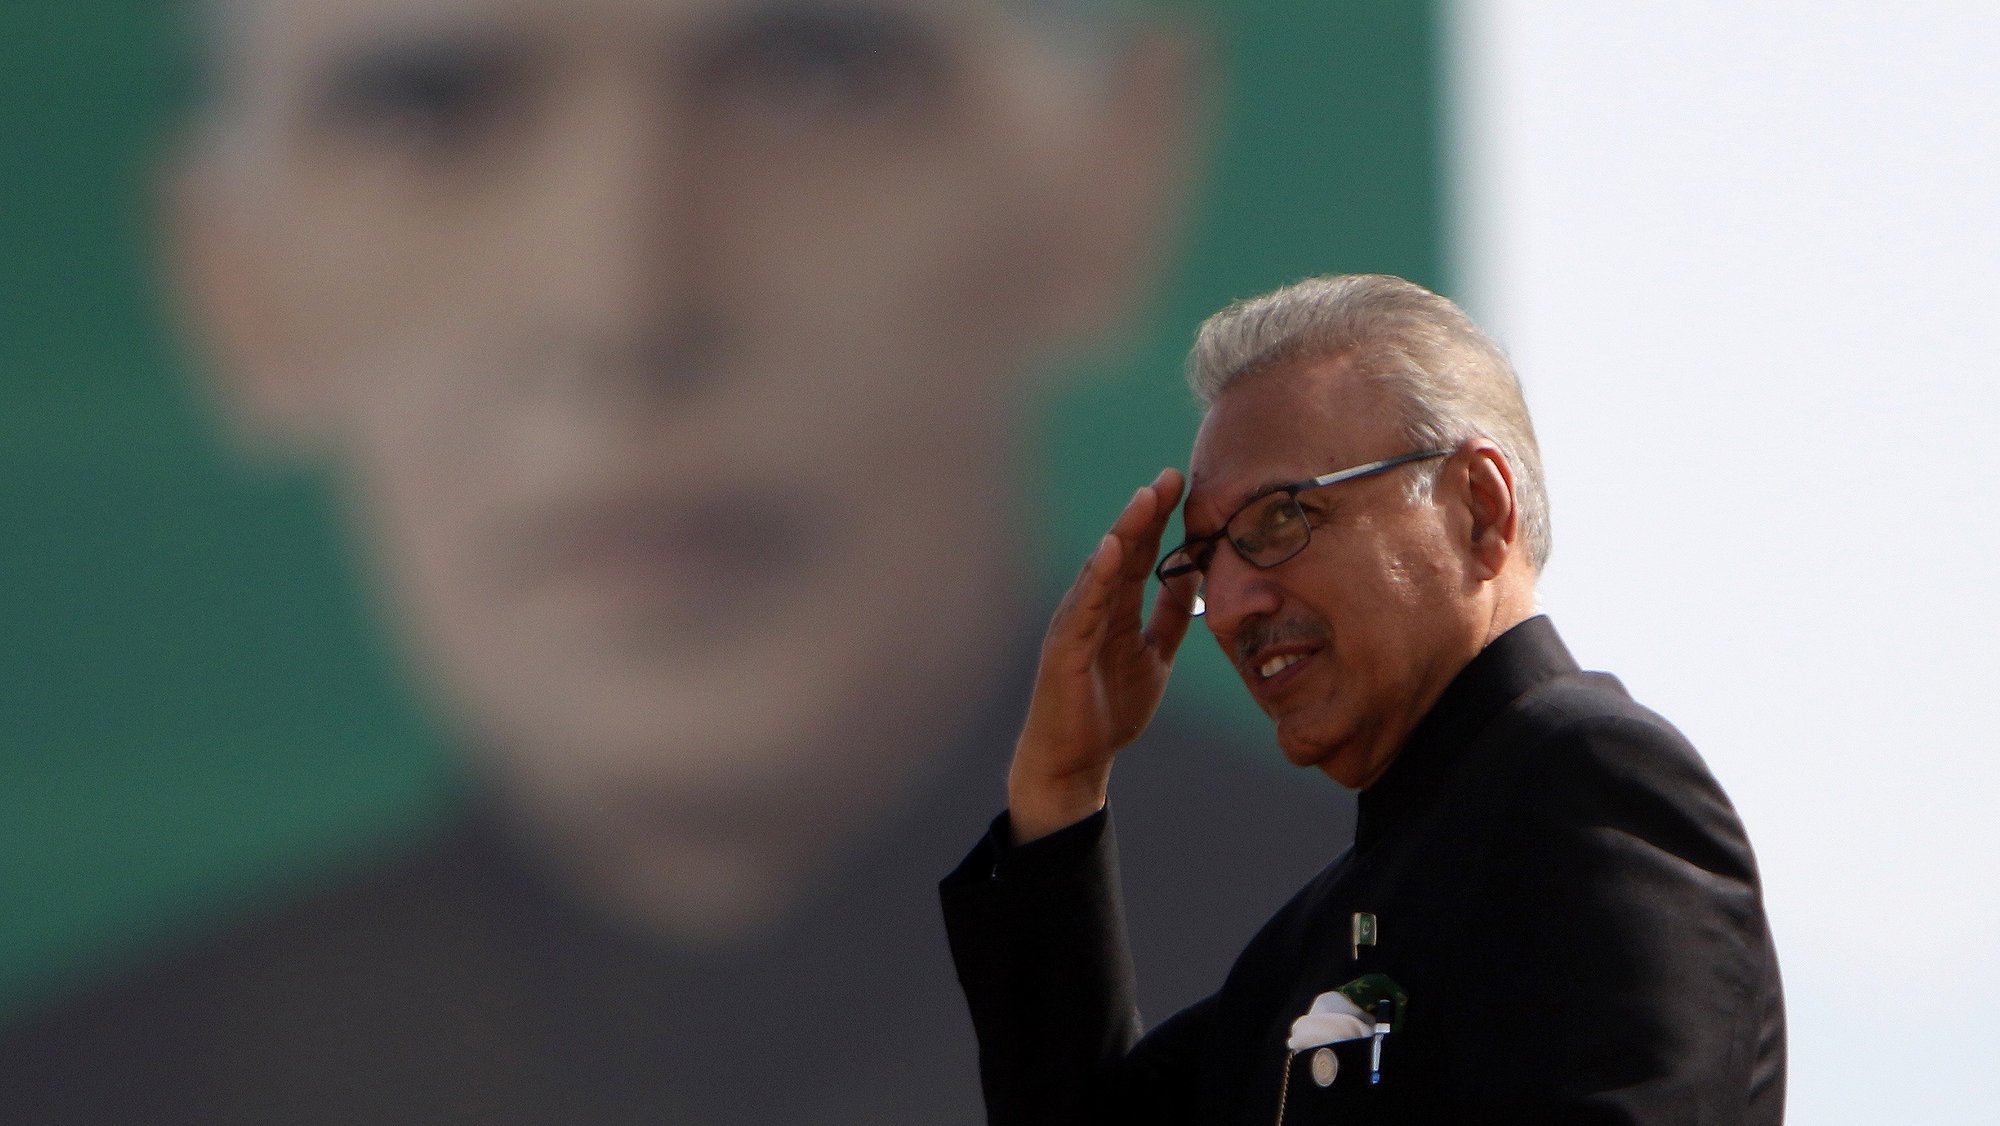 epa09106265 (FILE) Arif Alvi, President of Pakistan passes by the portrait of Muhammad Ali Jinnah, founder of Pakistan during the military parade to mark Pakistan National Day, in Islamabad, Pakistan, 25 March 2021 (reissued 30 March 2021). Pakistanâ€™s president Arif Alvi on 29 March, announced he had contracted coronavirus, two weeks after receiving the first dose of the Chinese Sinopharm vaccine as a third wave of infections hits the south Asian country. Pakistan tightened restrictions amid a fresh Covid-19 wave that is turning out to be worse than the previous two in a country battling an inordinate delay in anti-coronavirus vaccines.  EPA/SOHAIL SHAHZAD